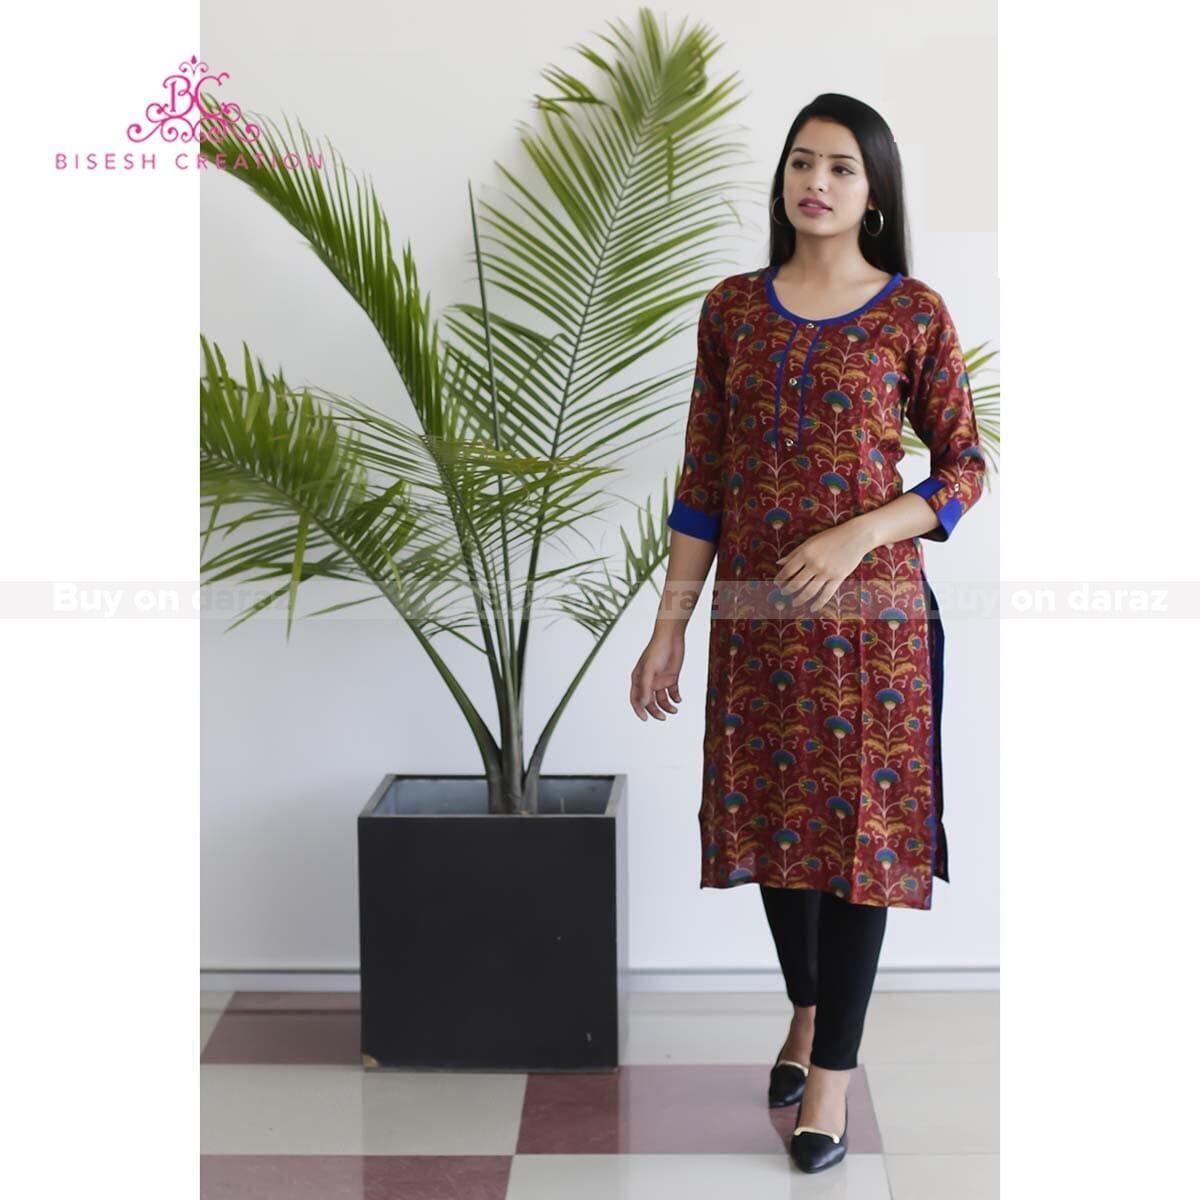 bisesh creation maroon blue floral printed front button for womened kurti for women